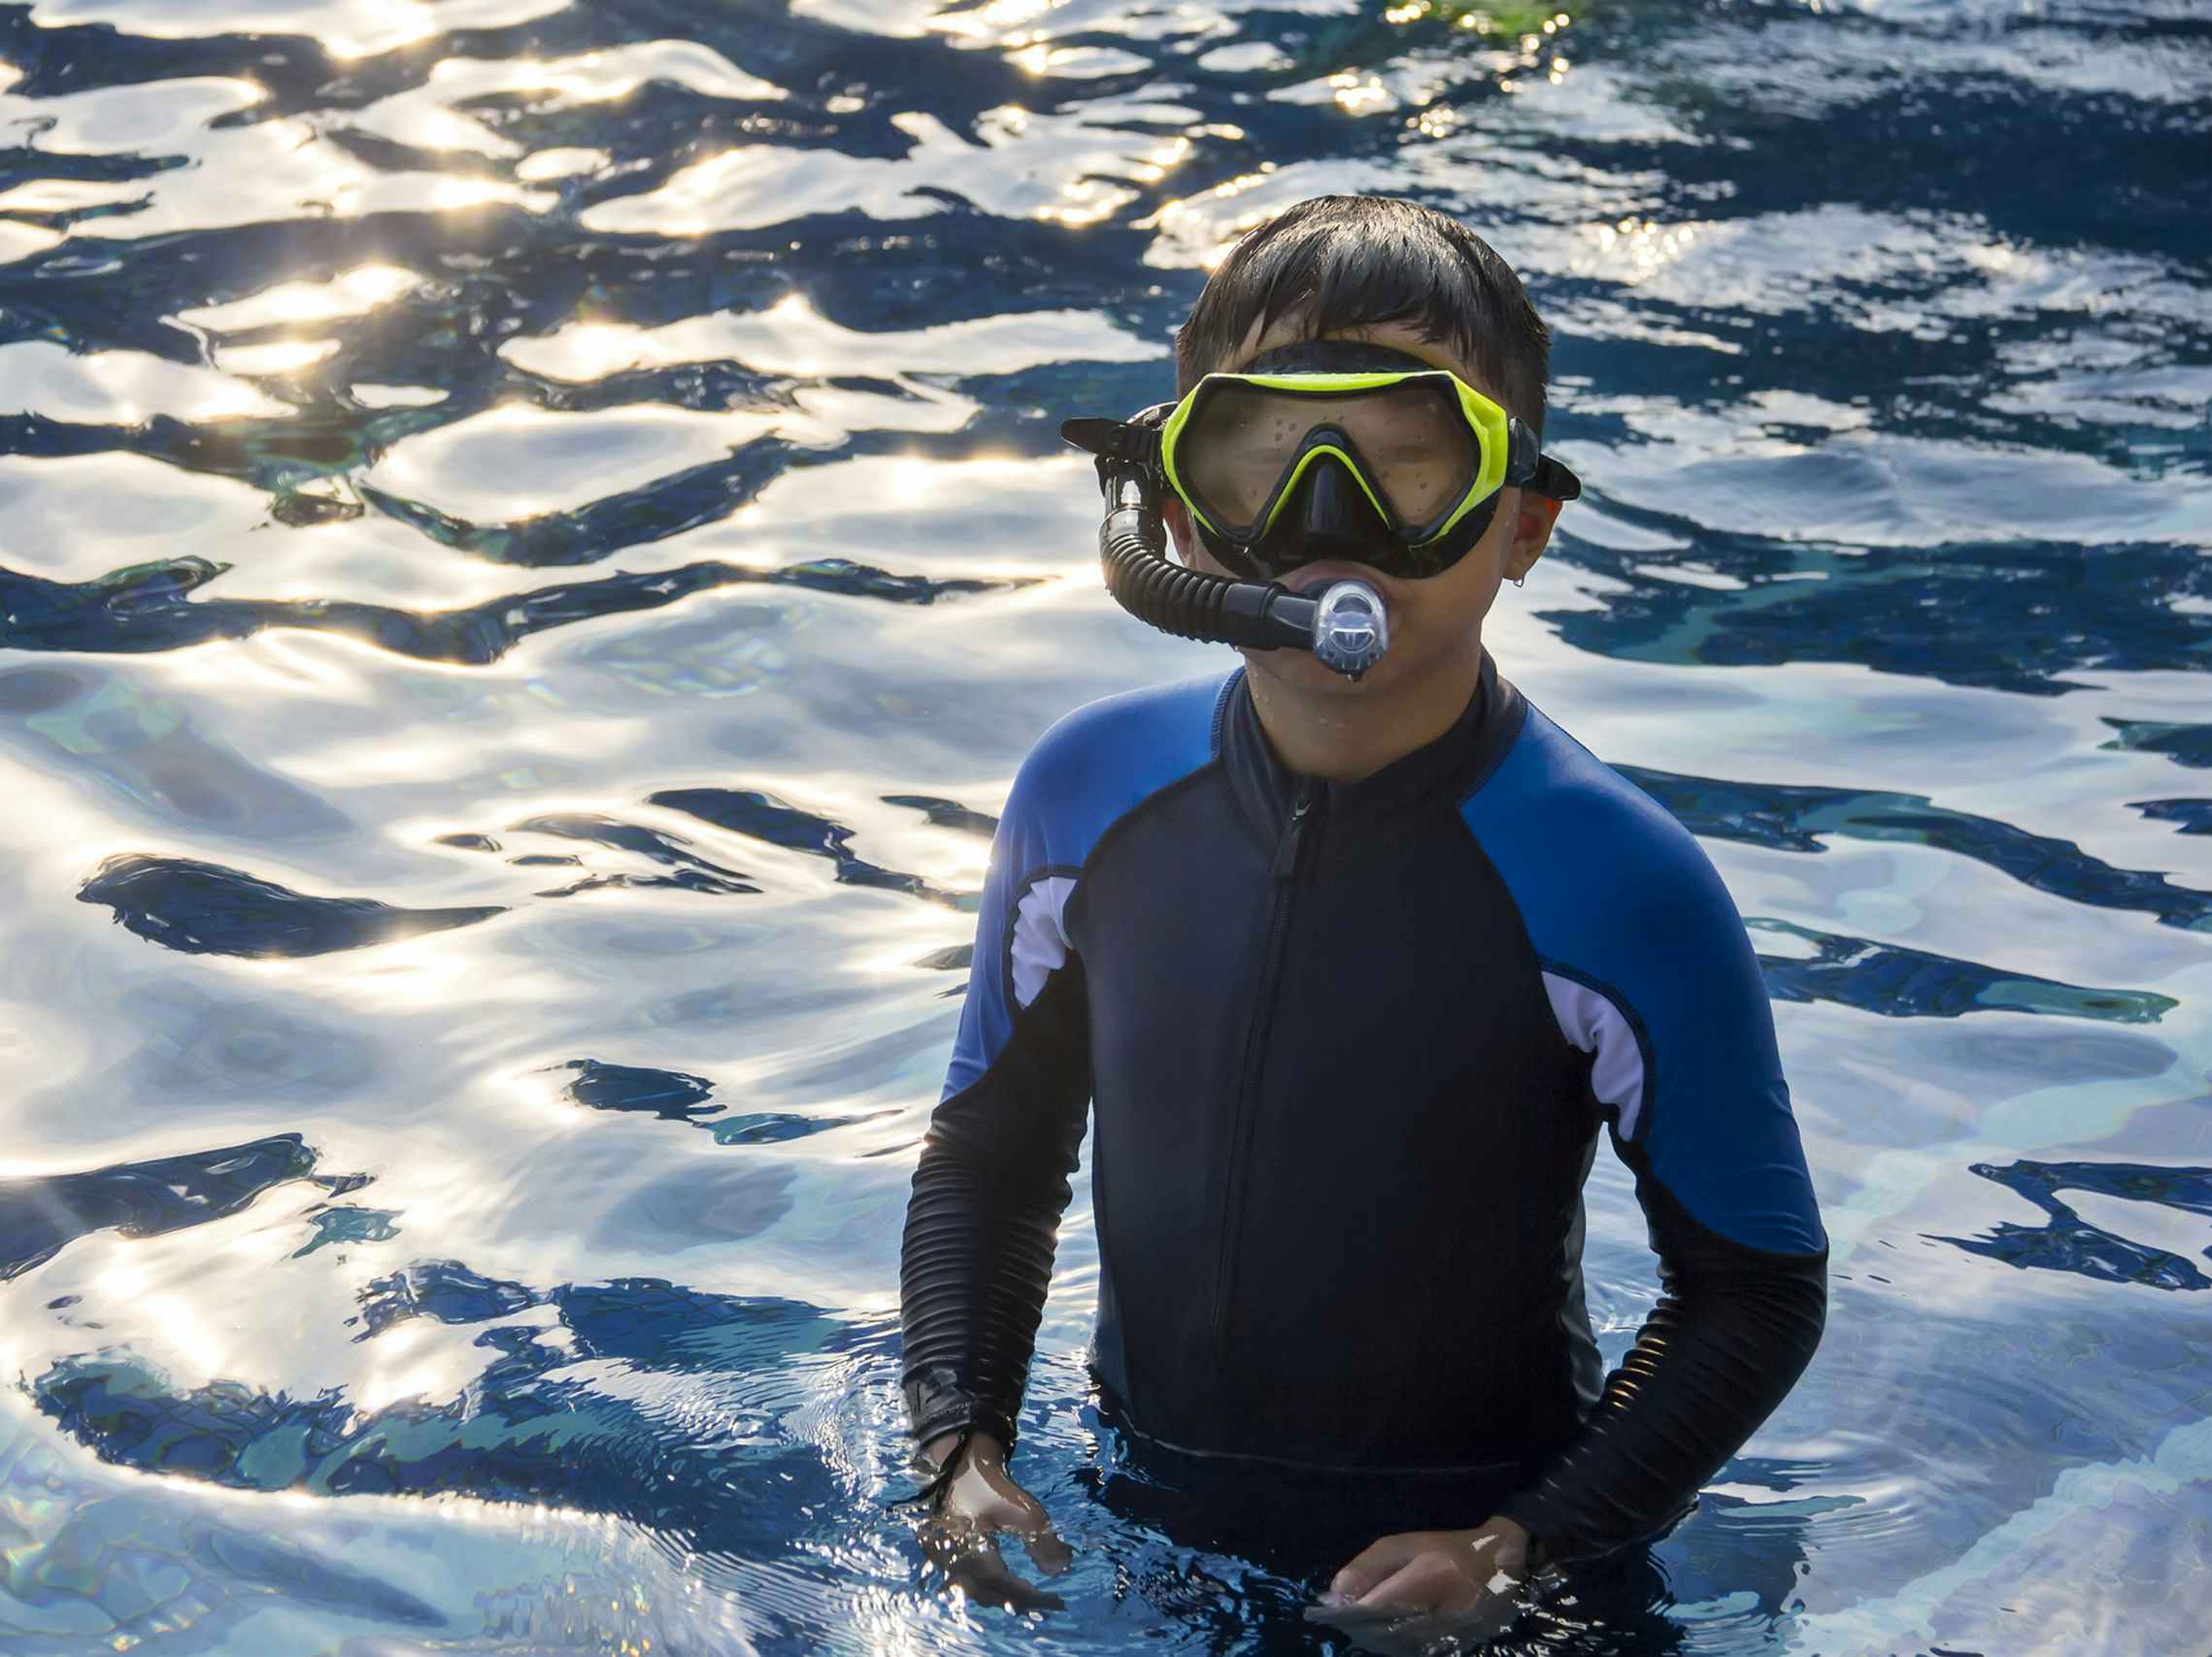 Kid standing in water with a snorkel on